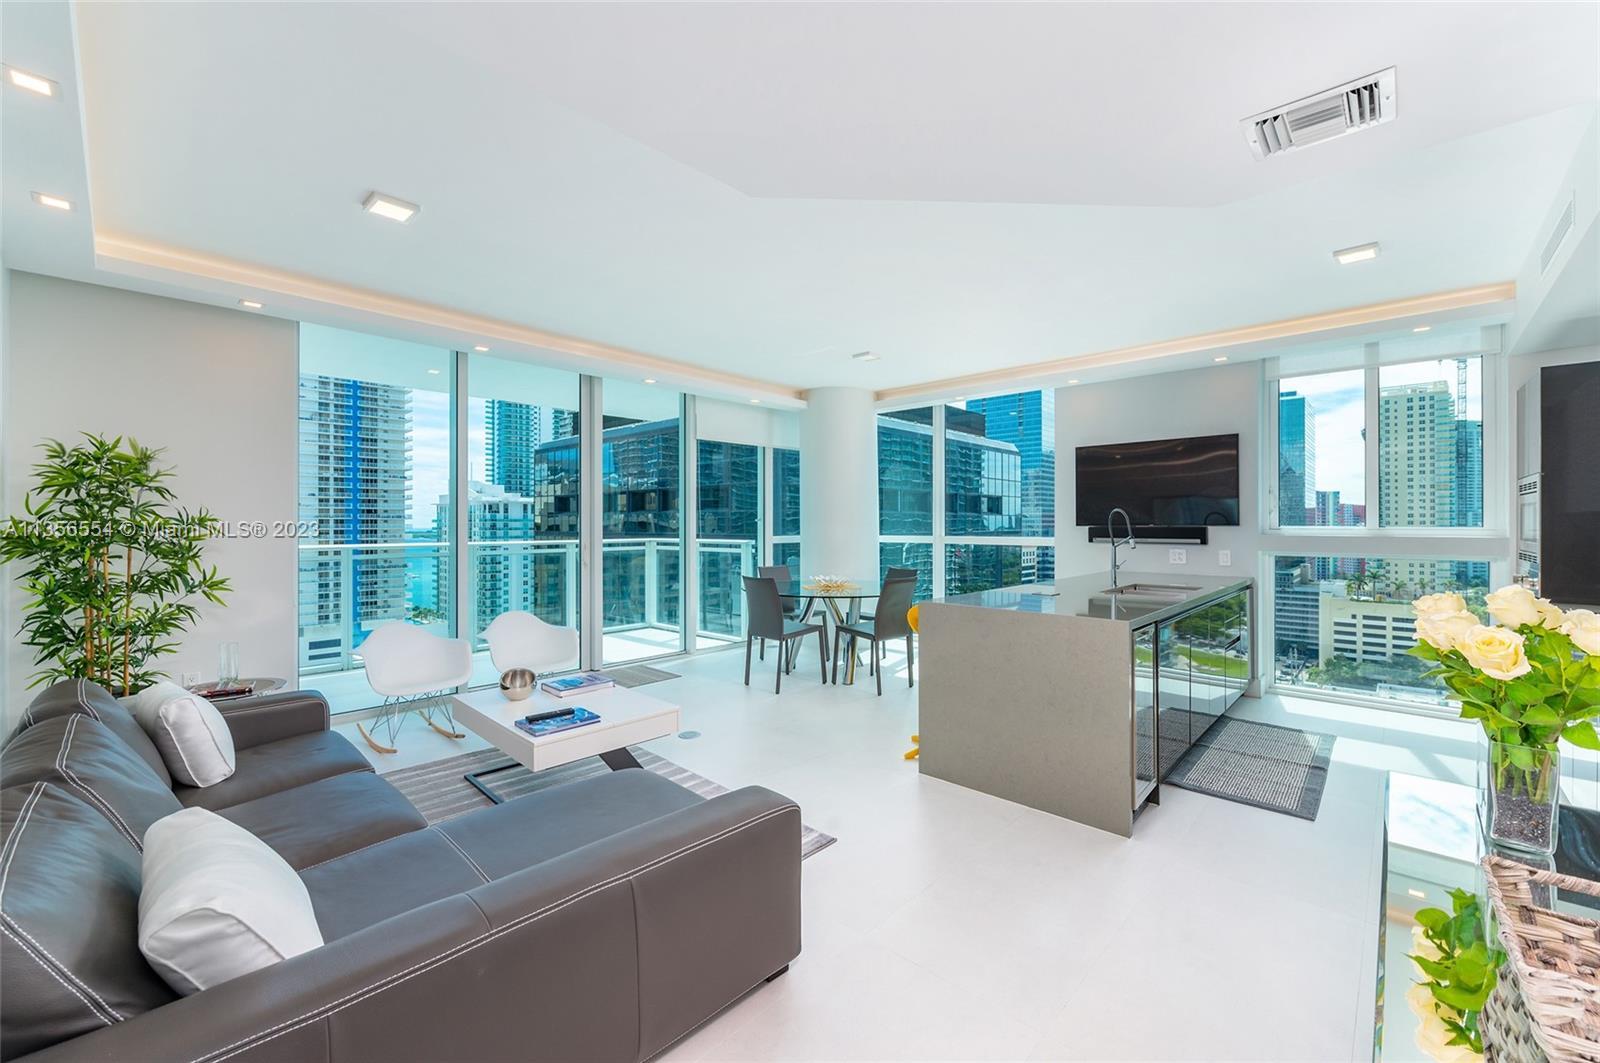 BEAUTIFUL 2/2 UNIT AT THE BOND,ONE OF BRICKELL’S MOST SOUGHT AFTER LUXURY BUILDINGS. 5 MINUTE WALK T